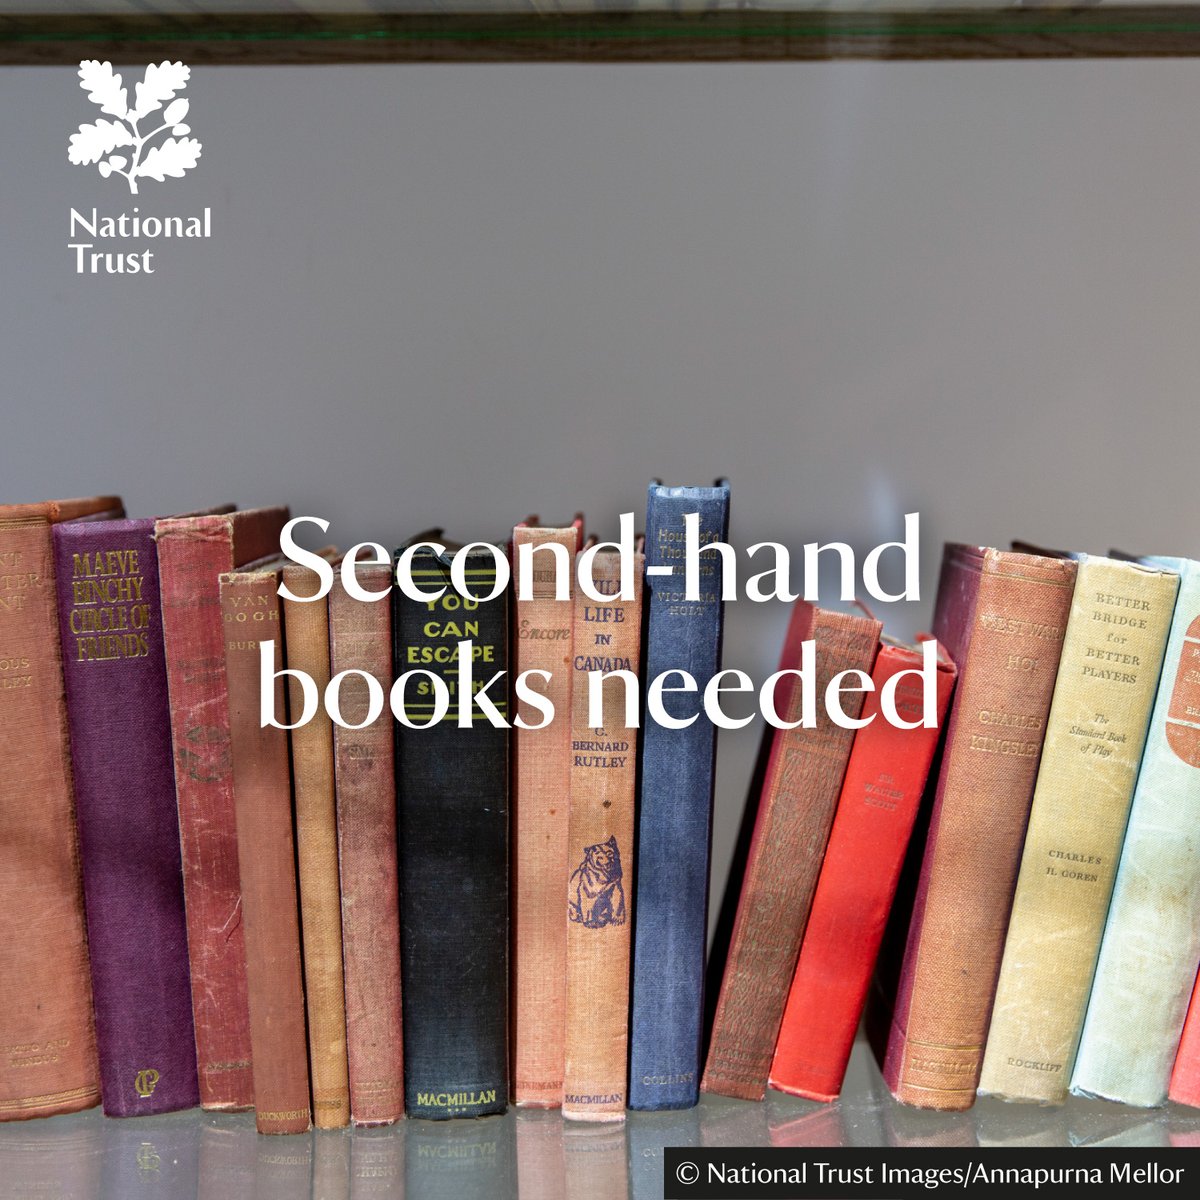 Do you have books you don't think you'll read again? If so, we'd love you to donate them to #MottistoneGardens. Our second-hand bookshop needs topping up, especially with paperback fiction & children's books. All funds from their sale are used to support our work on the Island.